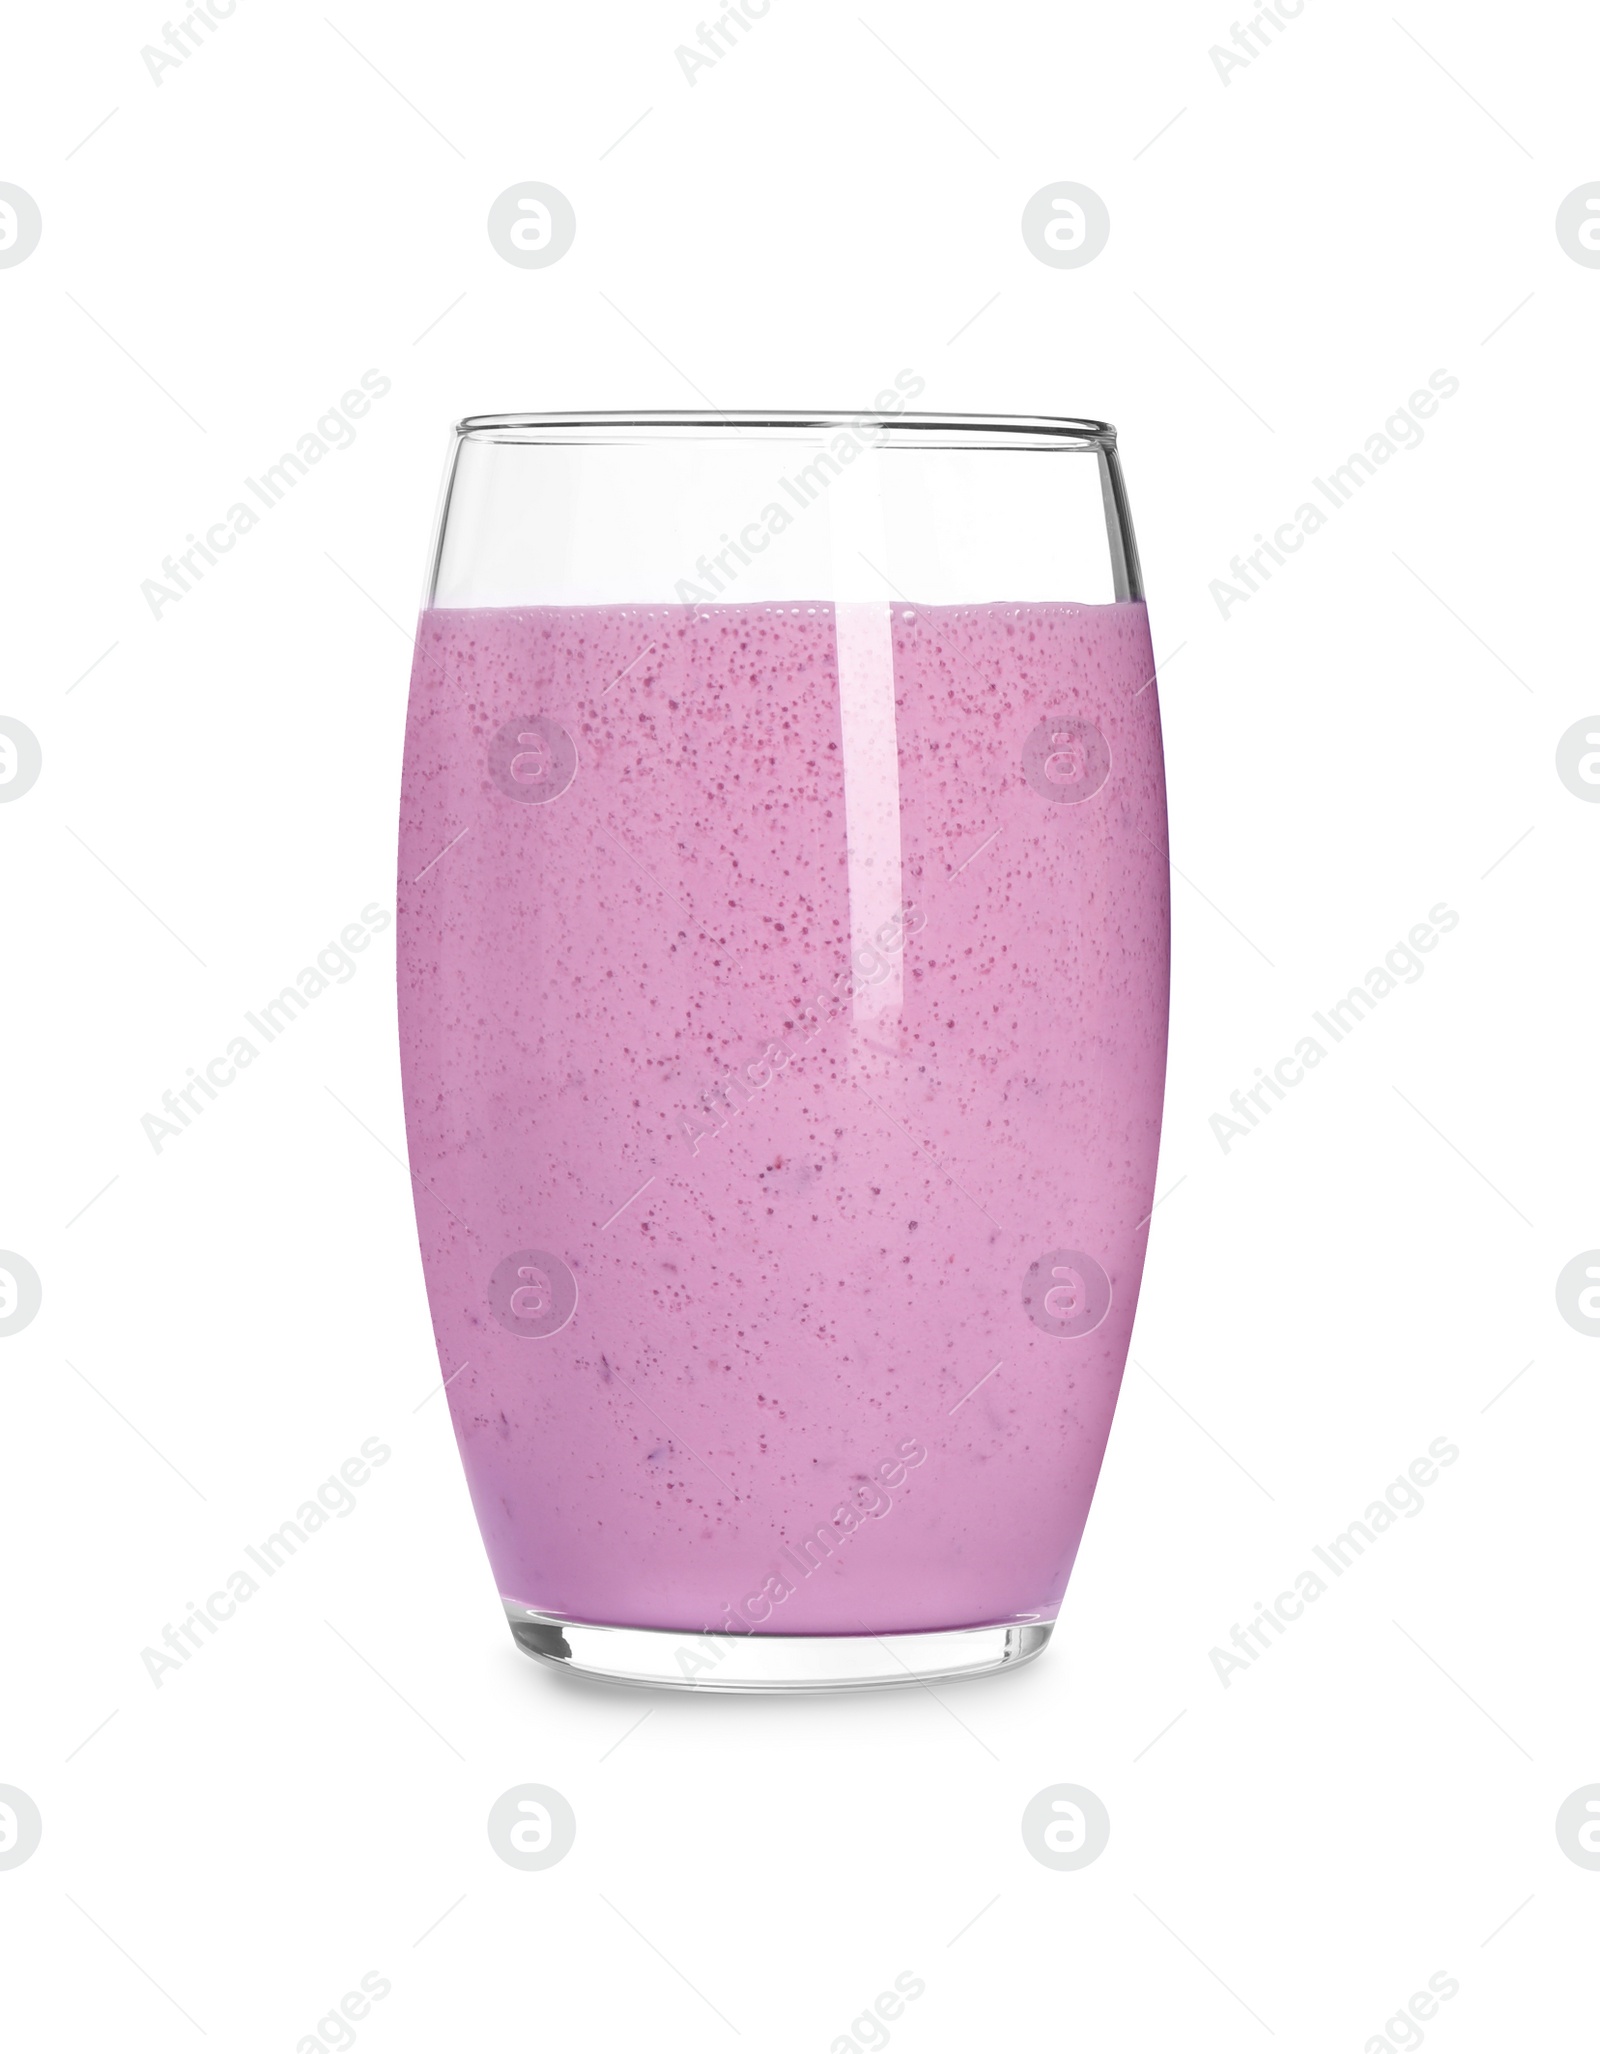 Photo of Delicious blackberry smoothie in glass on white background